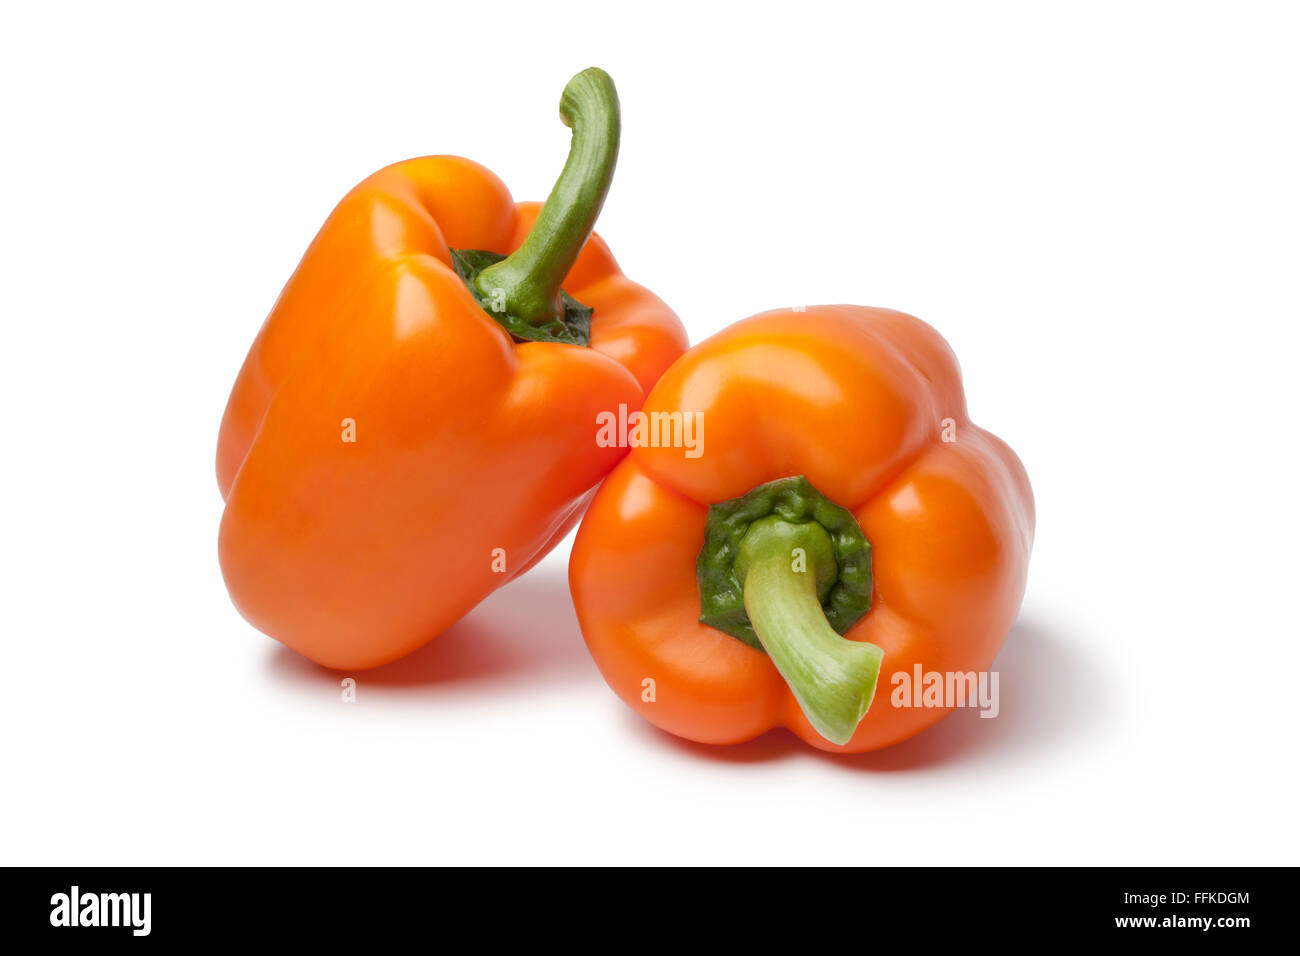 Whole fresh orange bell peppers on white background Stock Photo